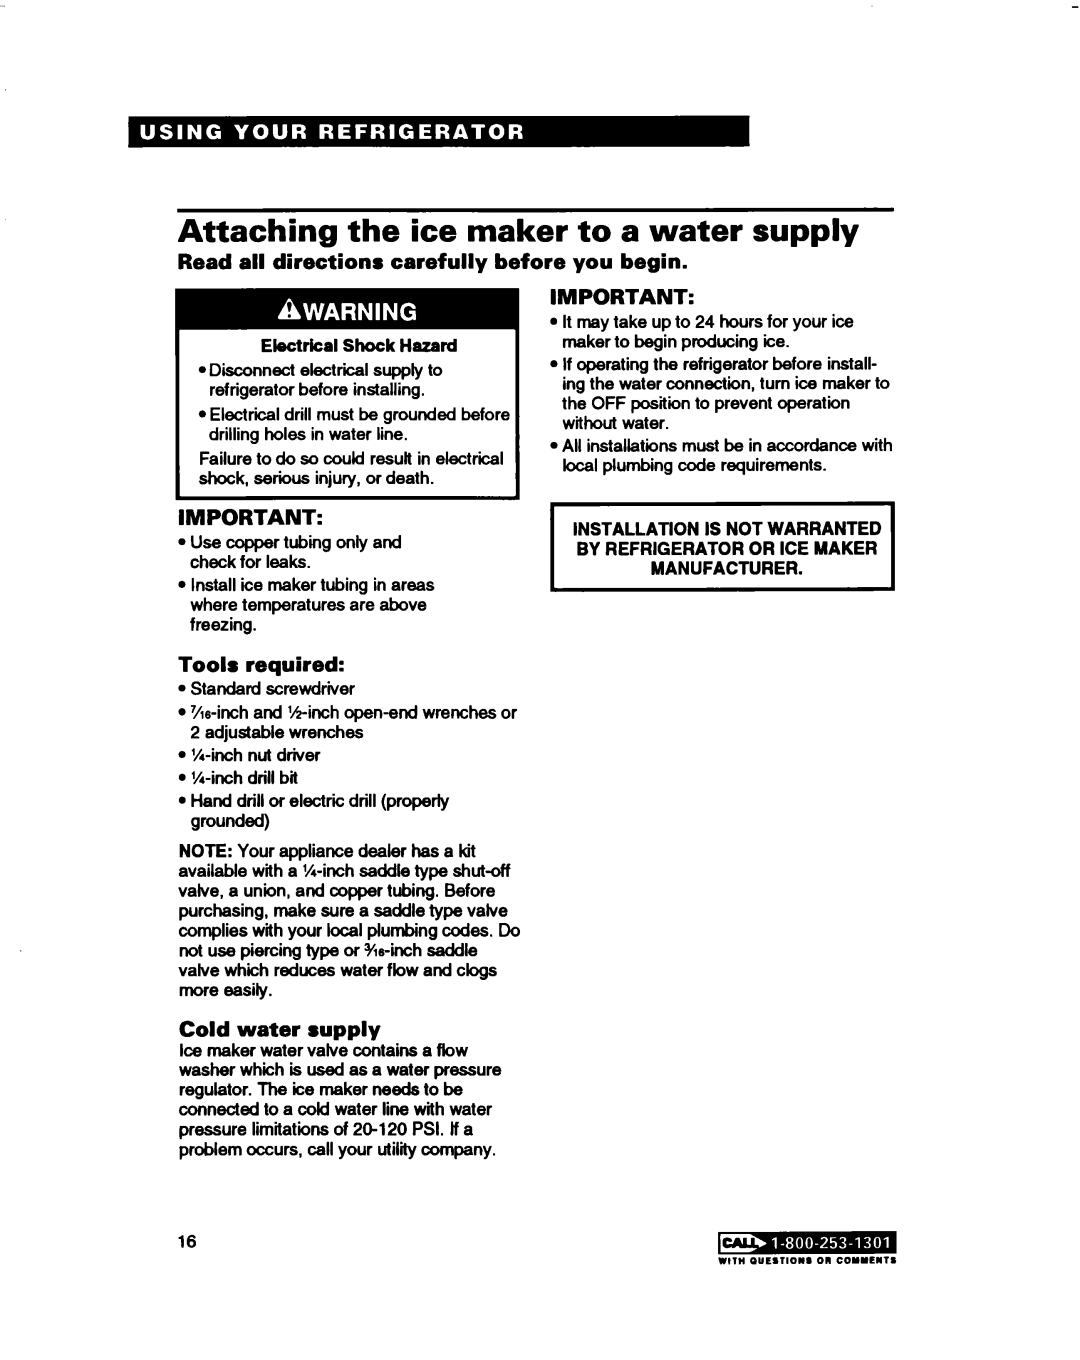 Estate 2173445 Attaching the ice maker to a water supply, Read all directions carefully before you begin, Tools required 